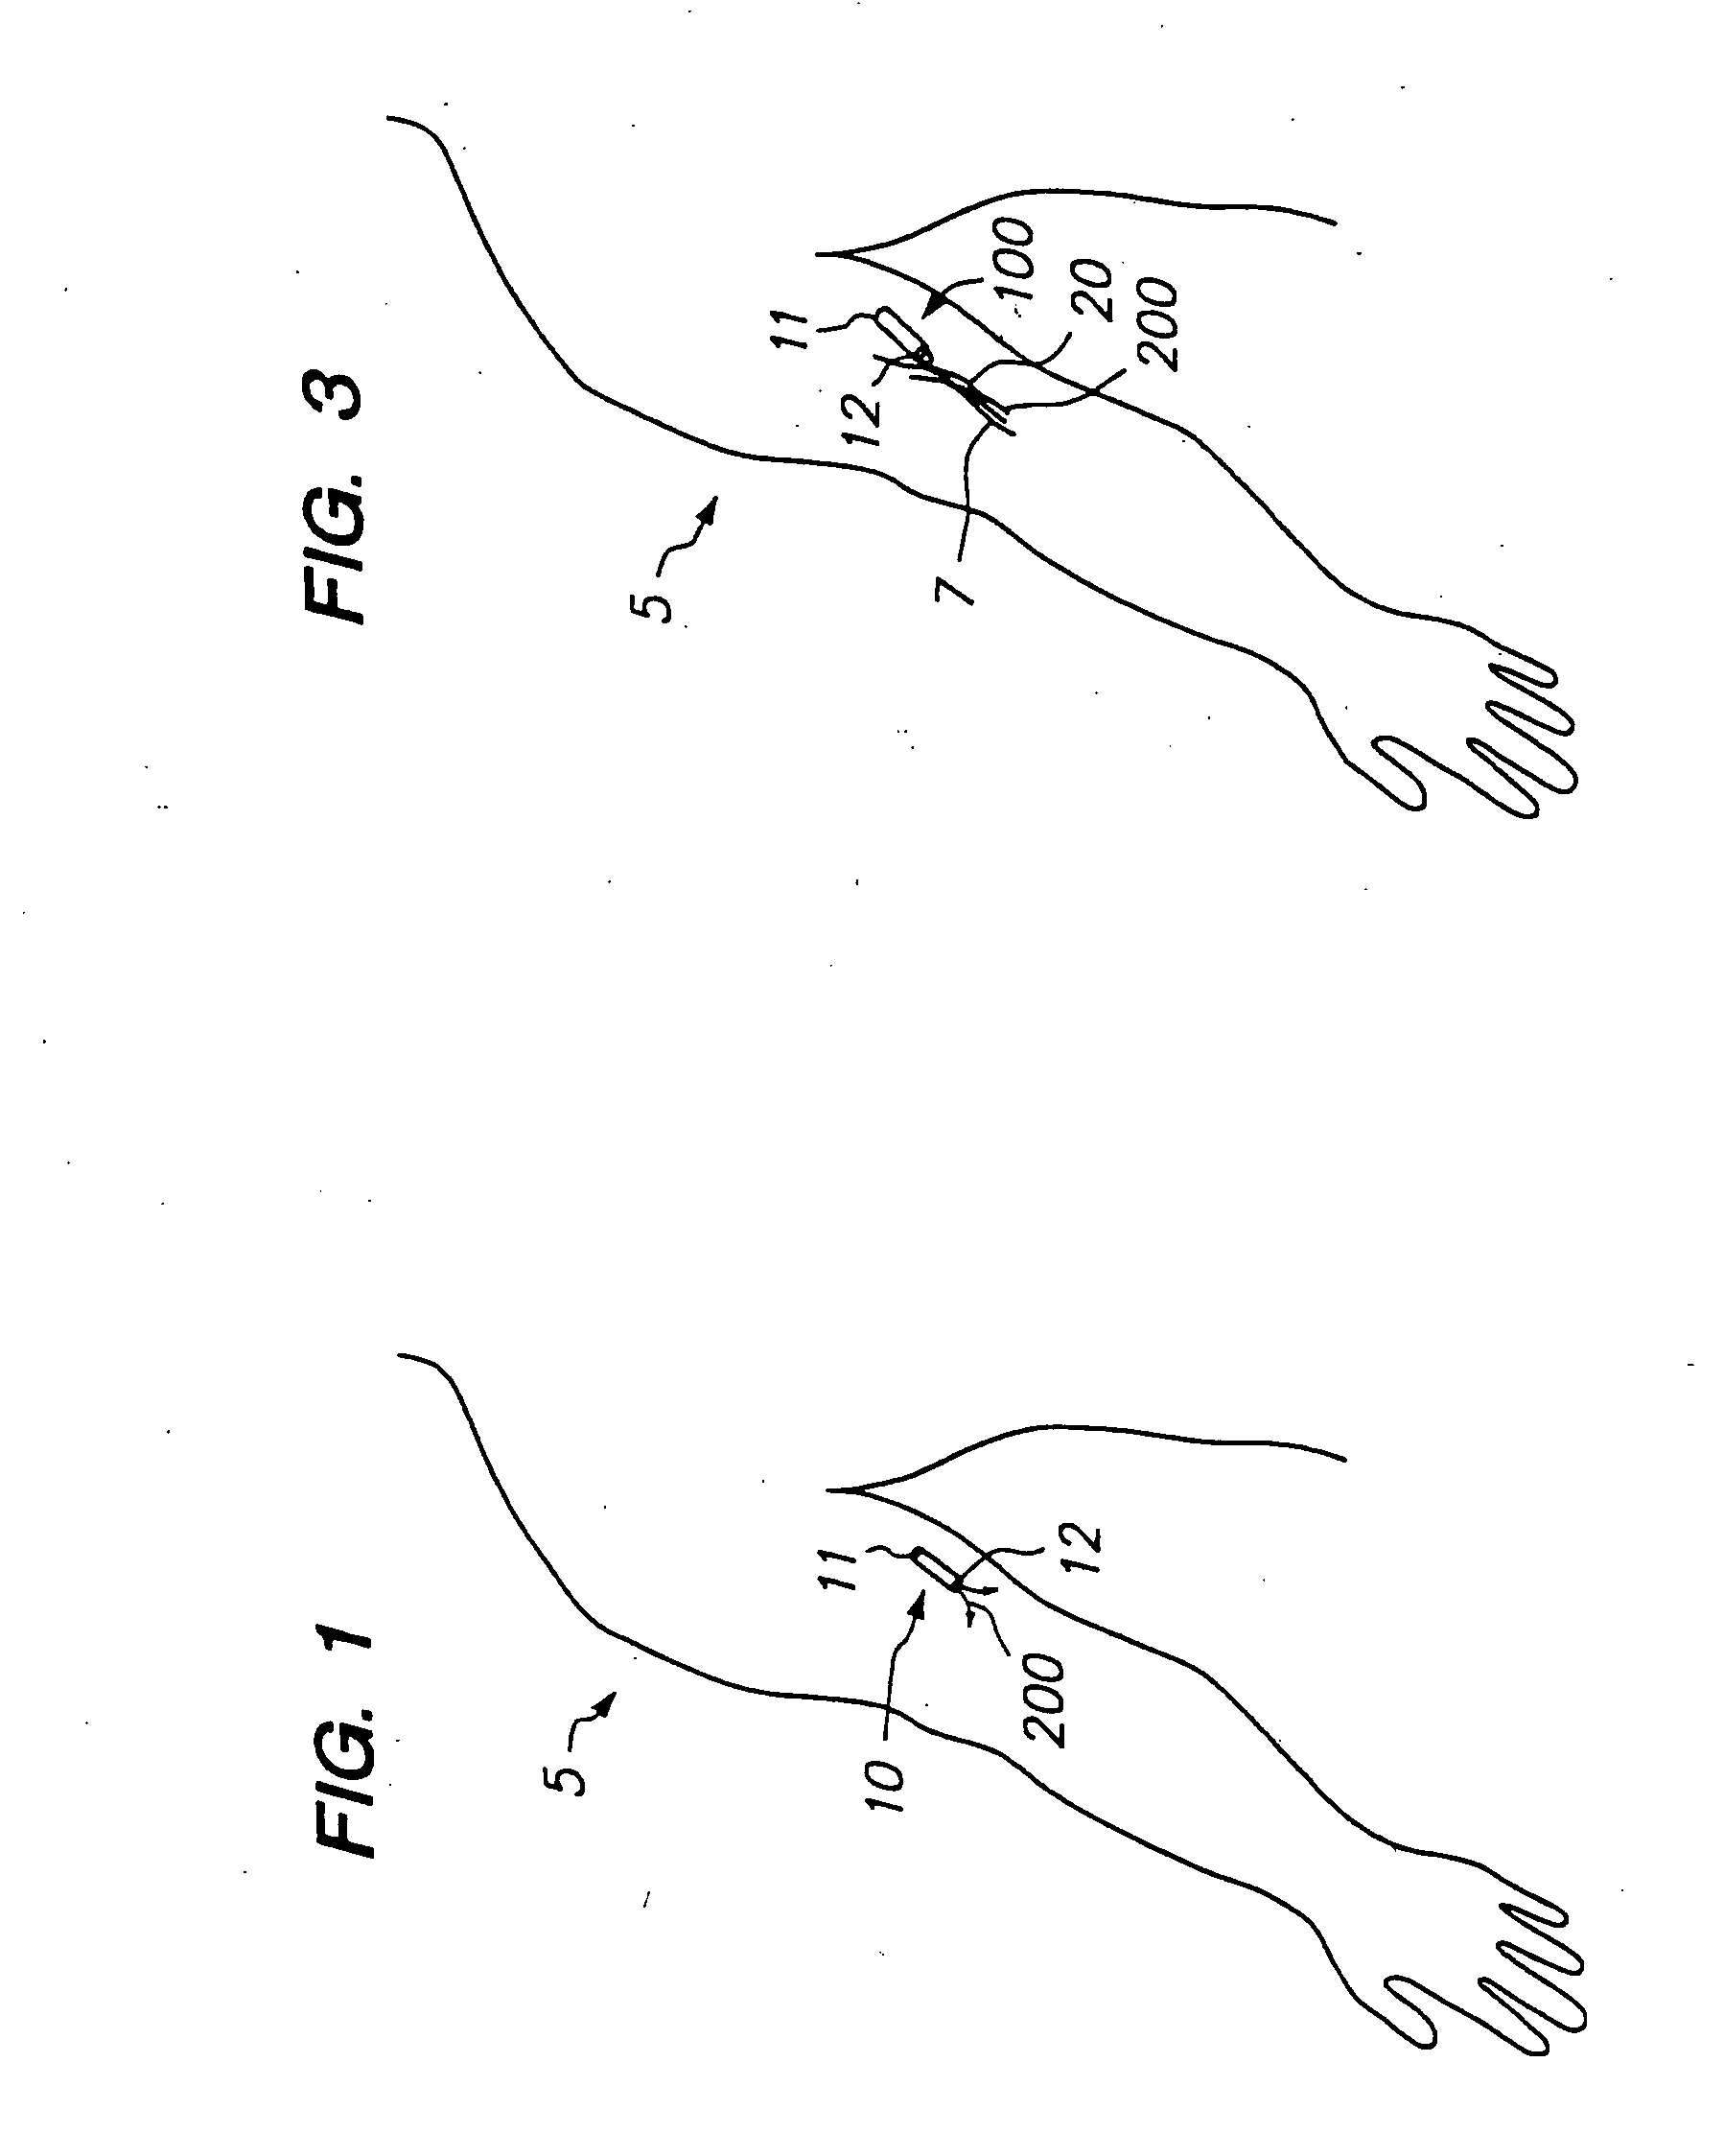 Devices and methods for pain management